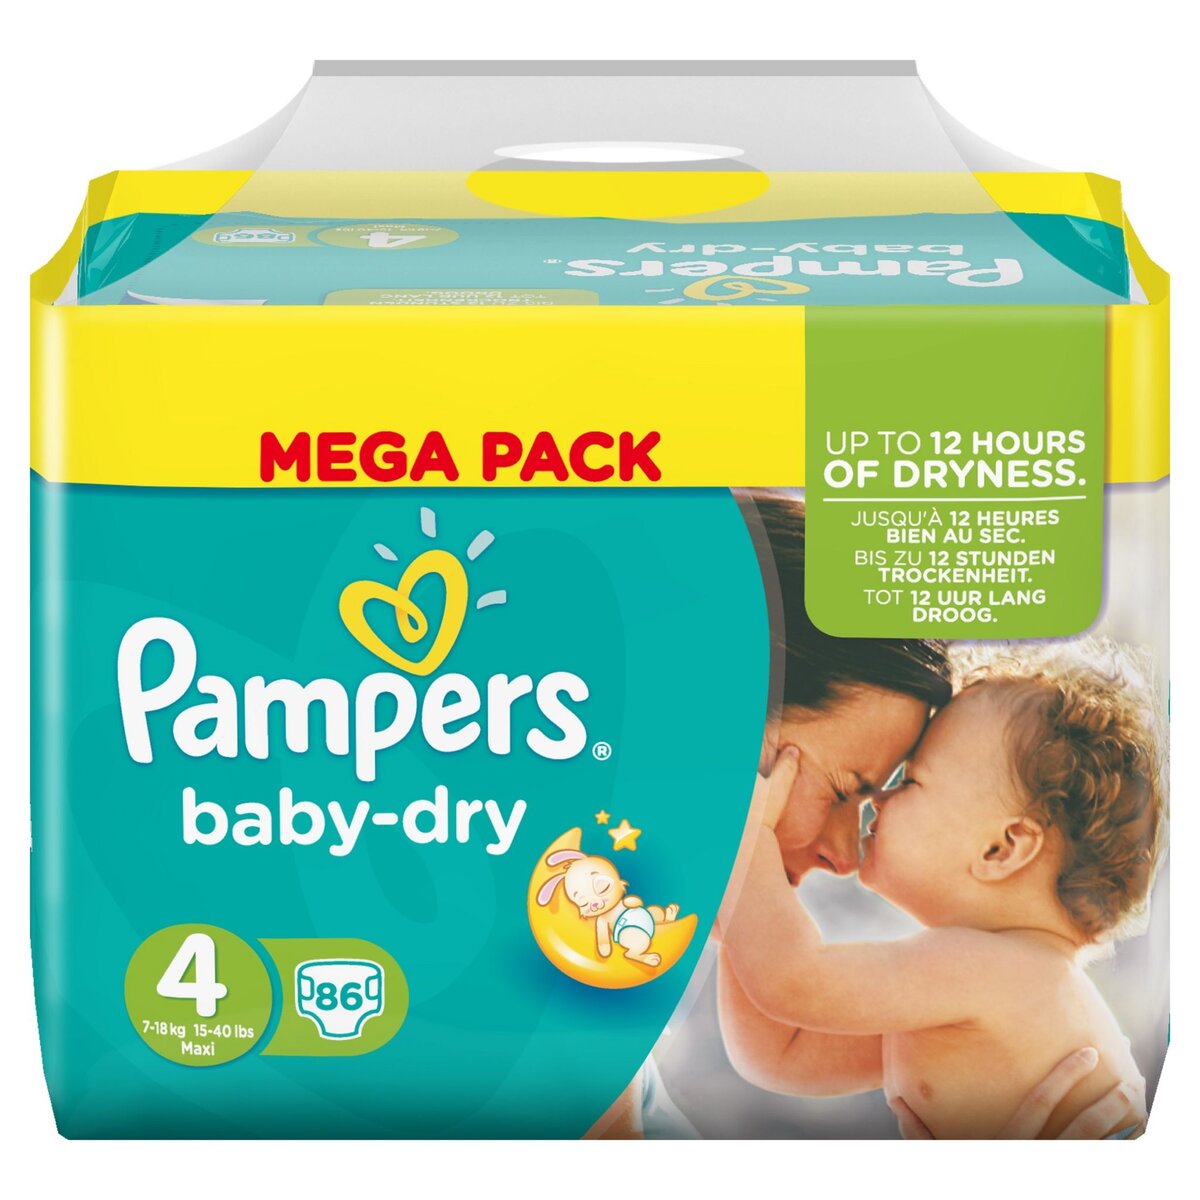 Pampers Baby Dry Taille 1, 21 couches, jusqu'à 12 heures de